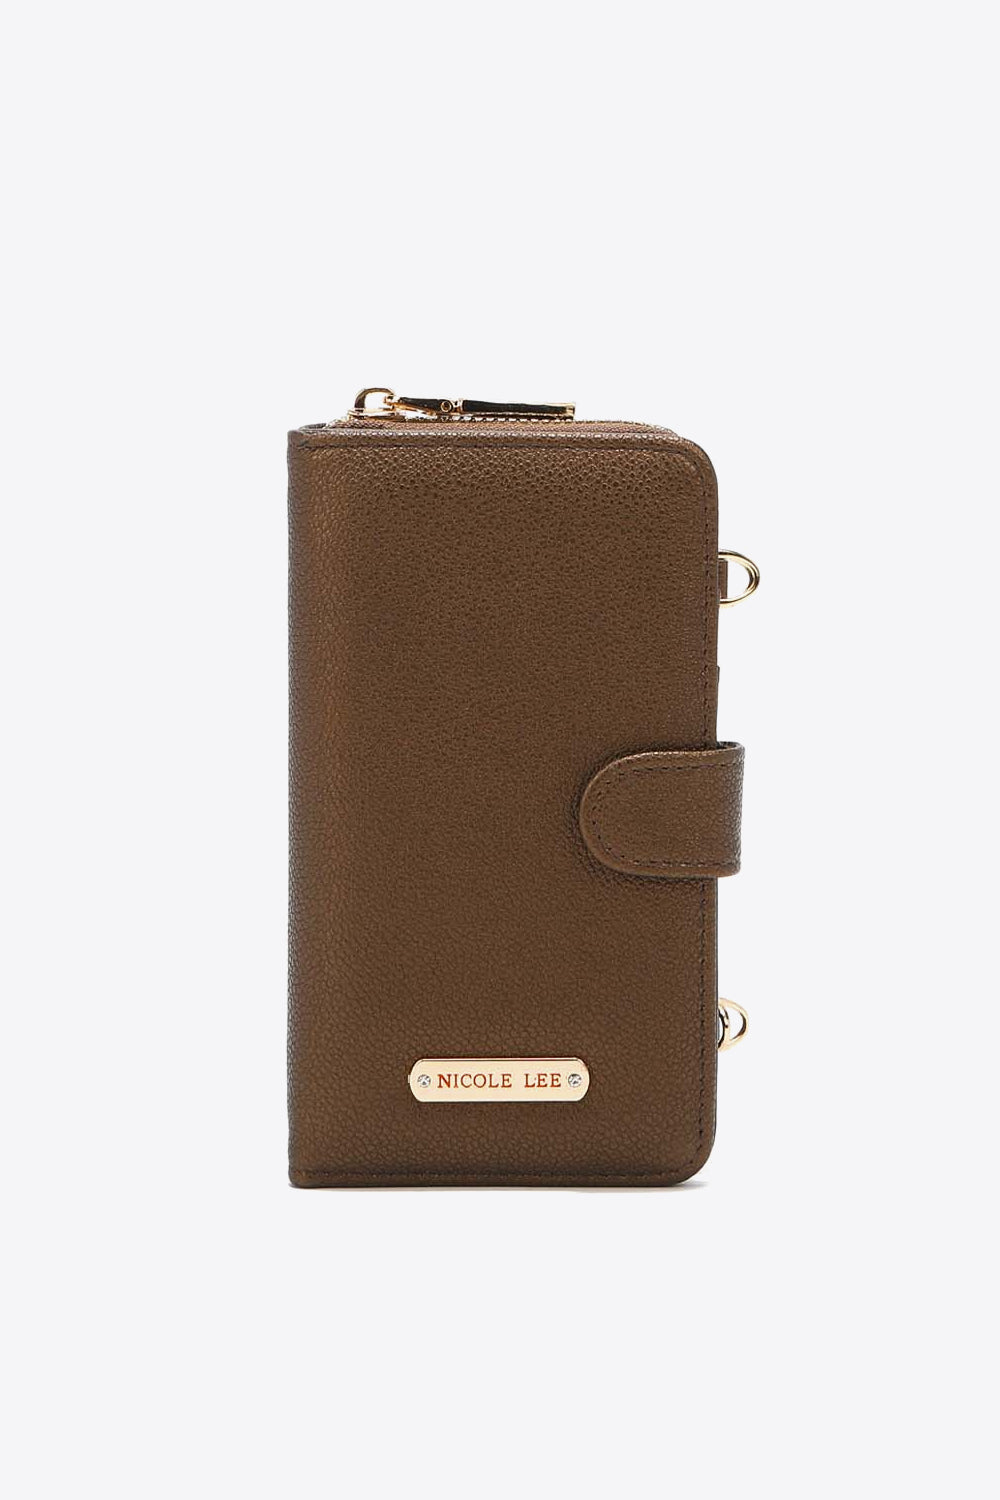 Two-Piece Crossbody Phone Case Wallet by Nicole Lee USA